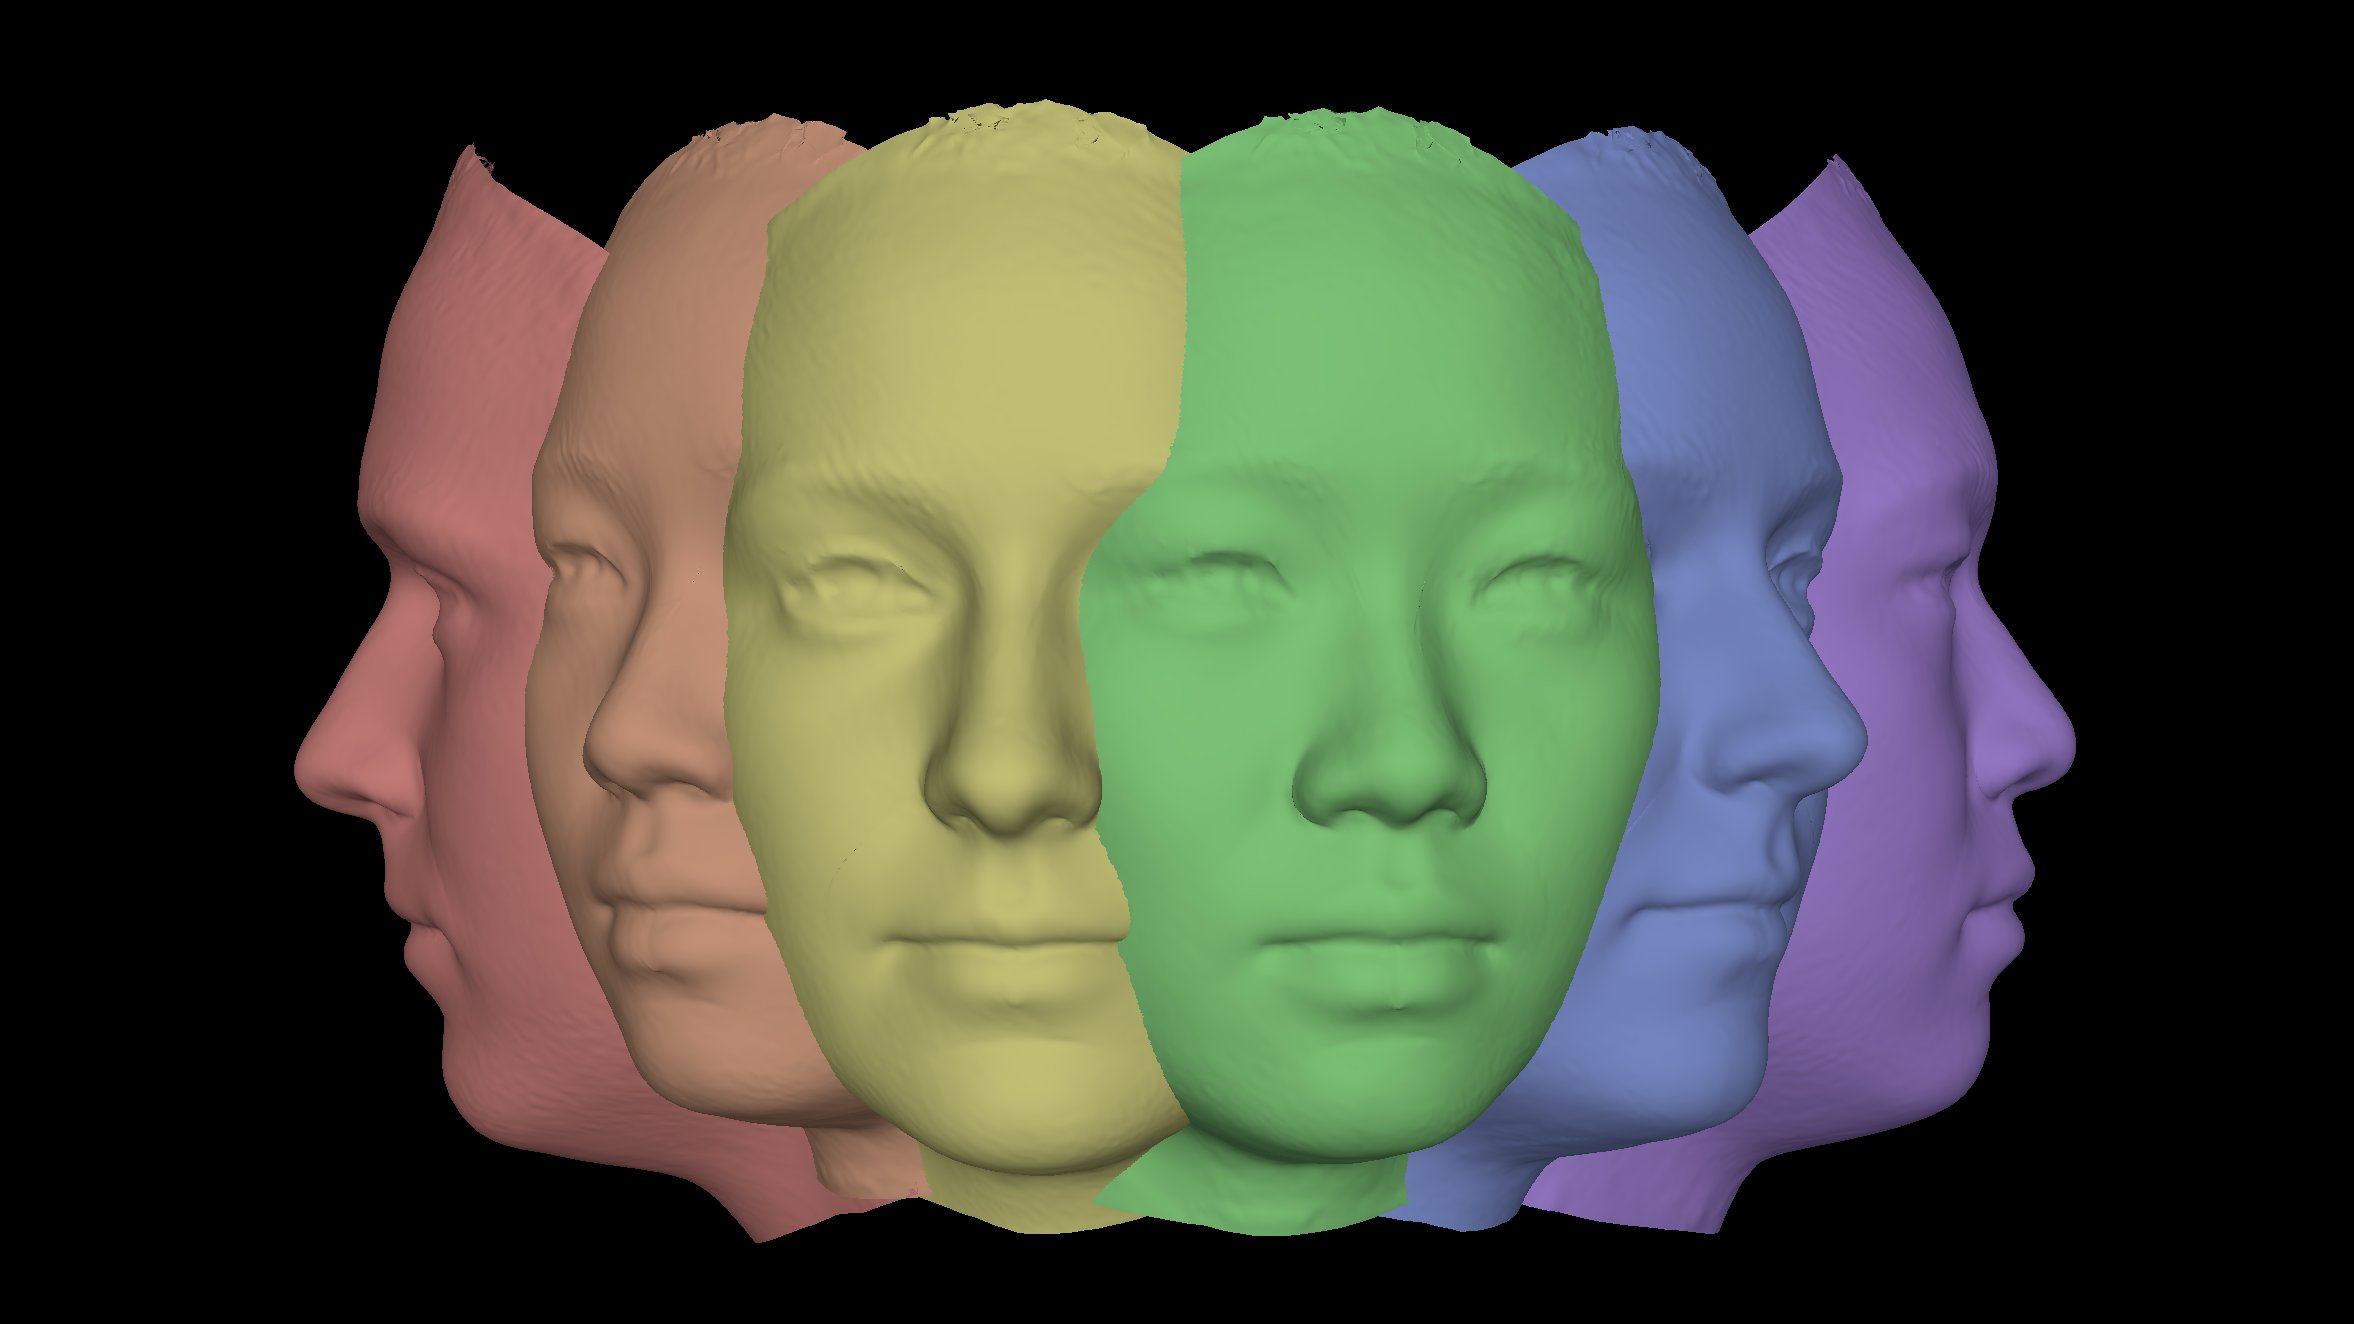 Six 3D faces in rainbow colours